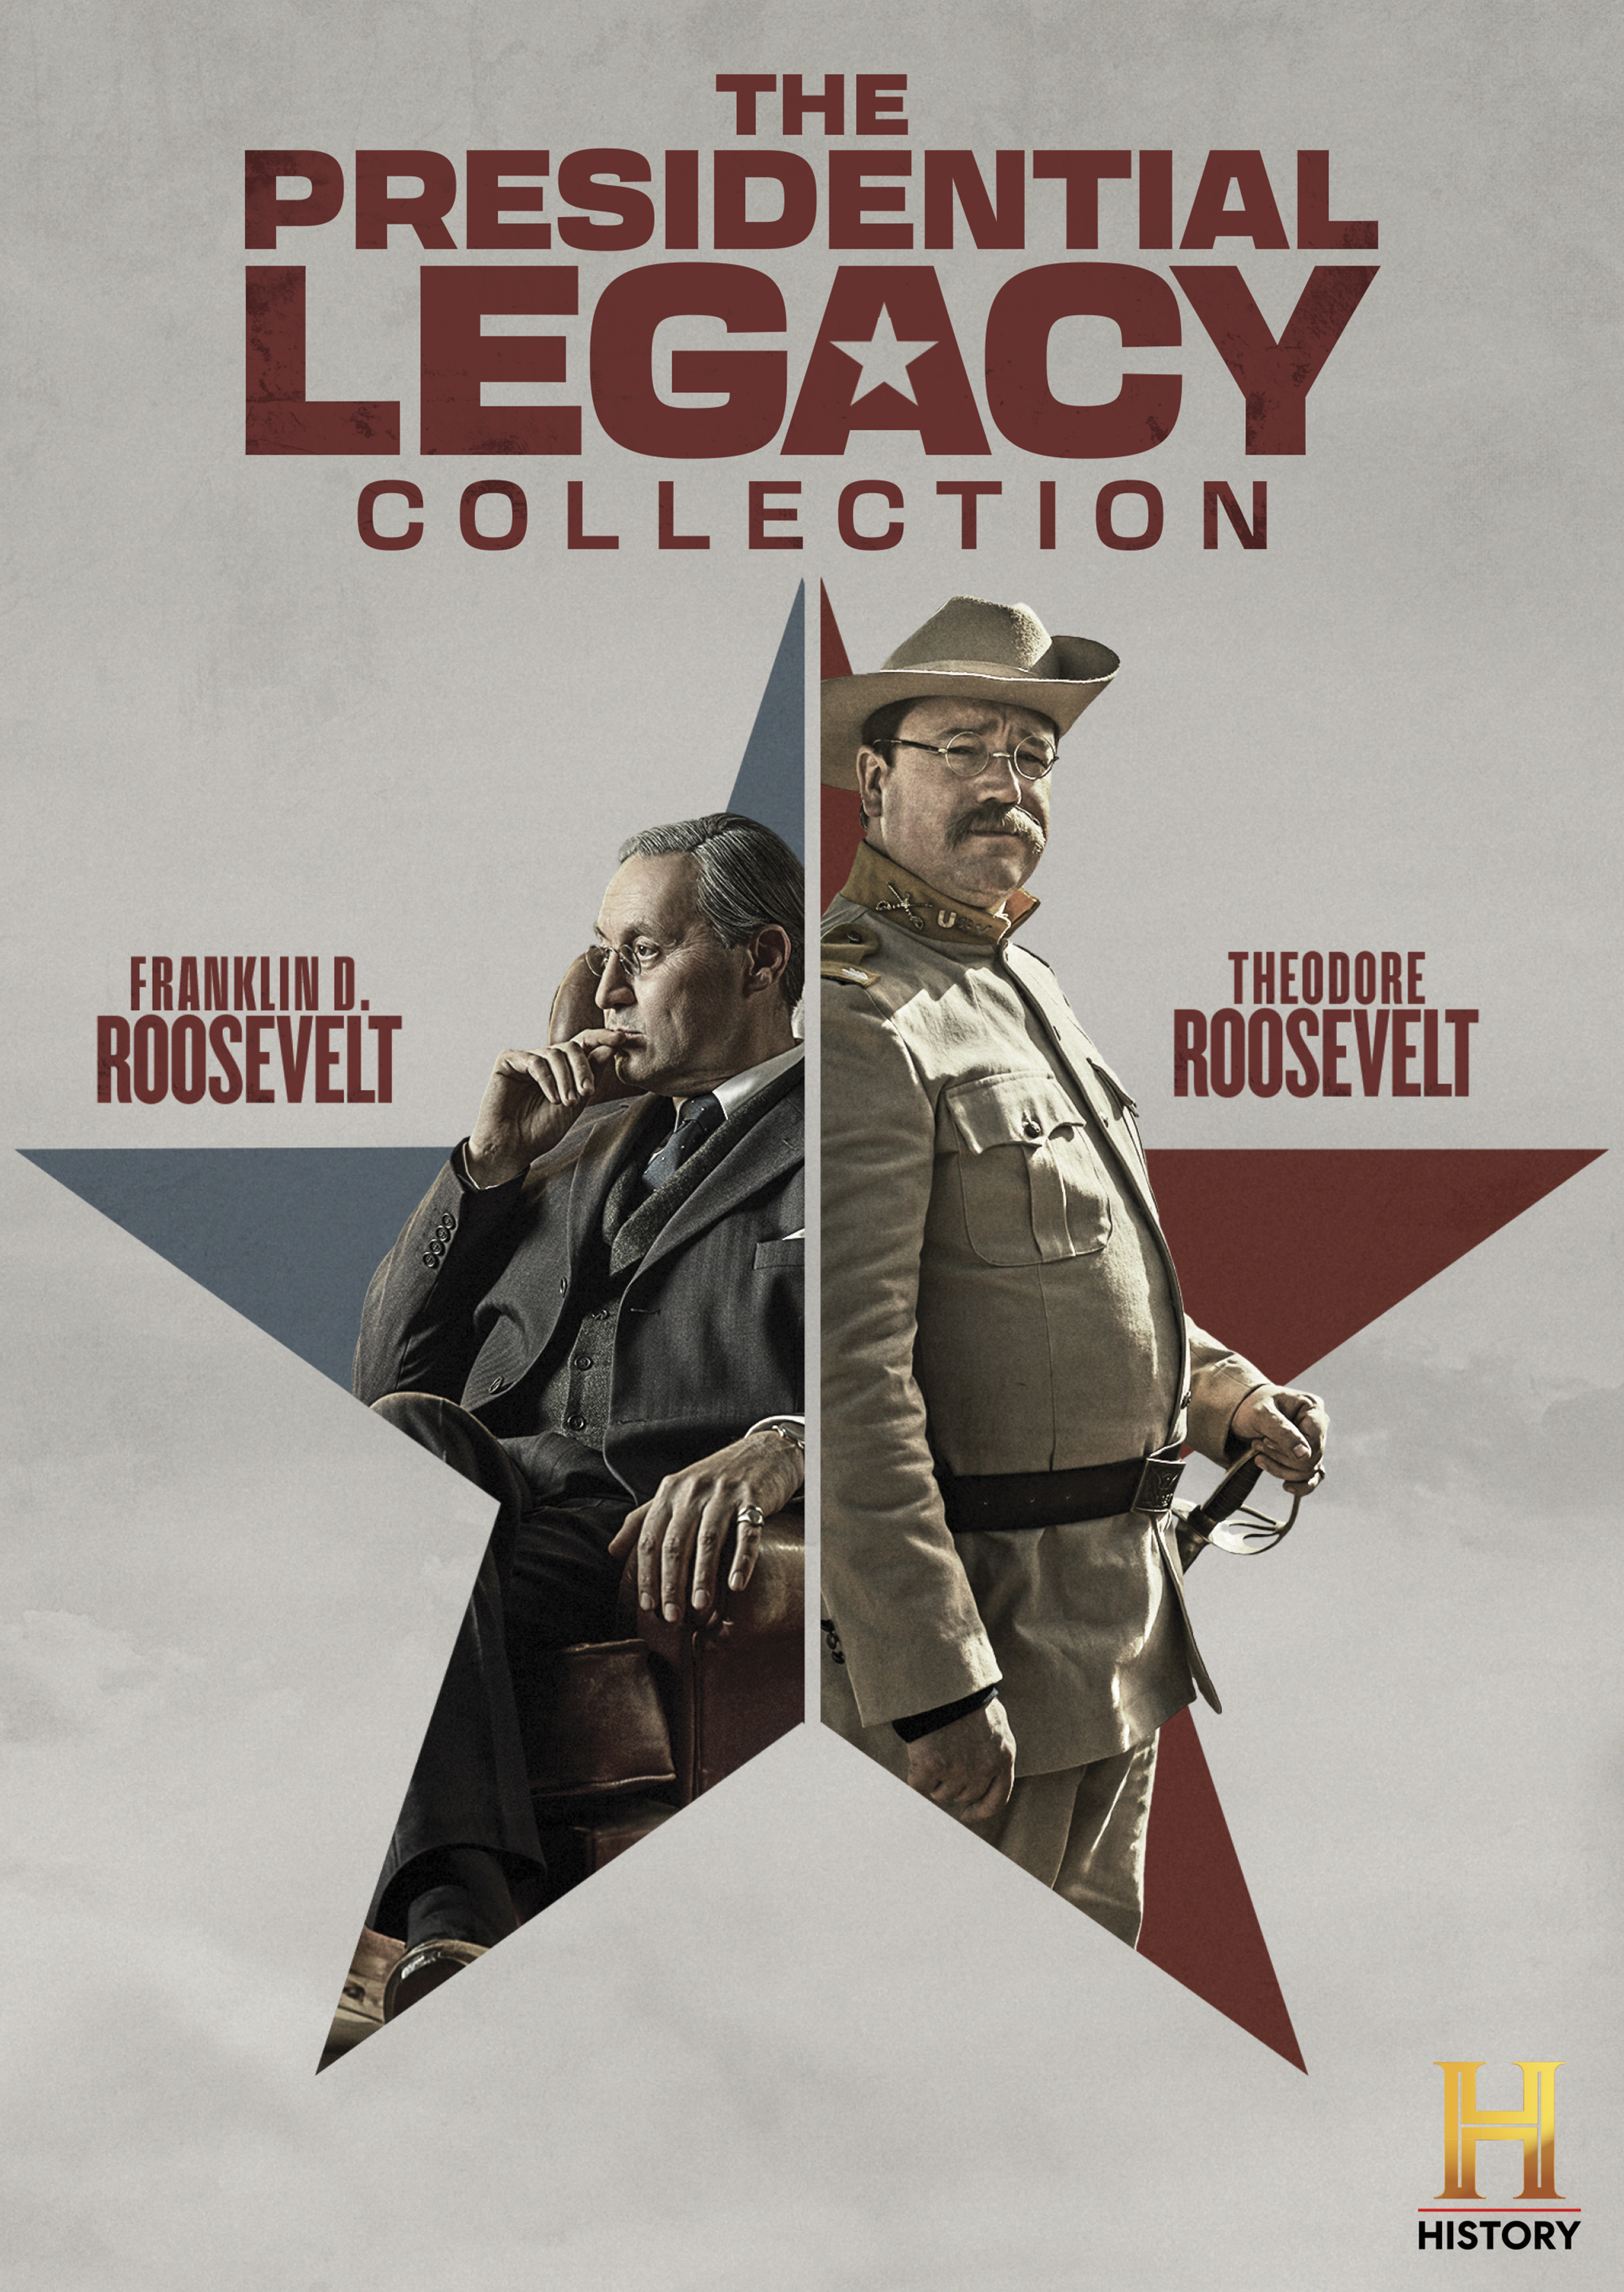 The Presidential Legacy Collection: Theodore Roosevelt & FDR DVD cover (HISTORY/Lionsgate)